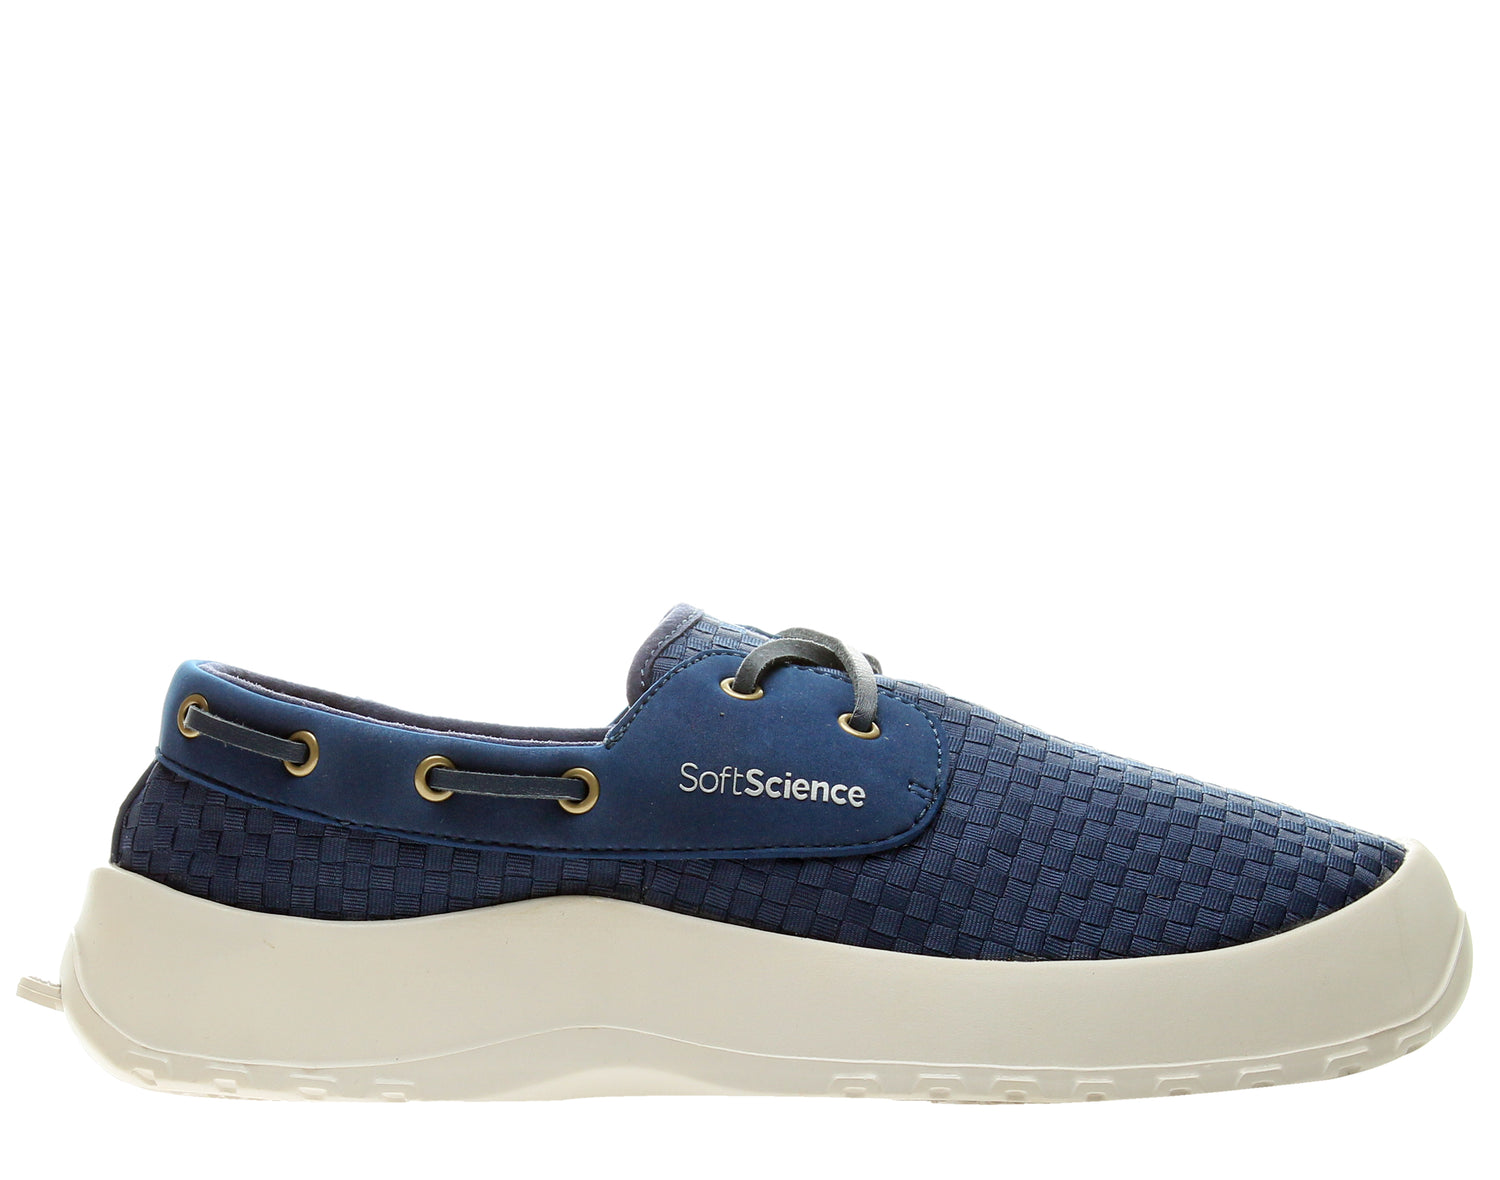 SoftScience Cruise Men's Lace Up Boat Shoes